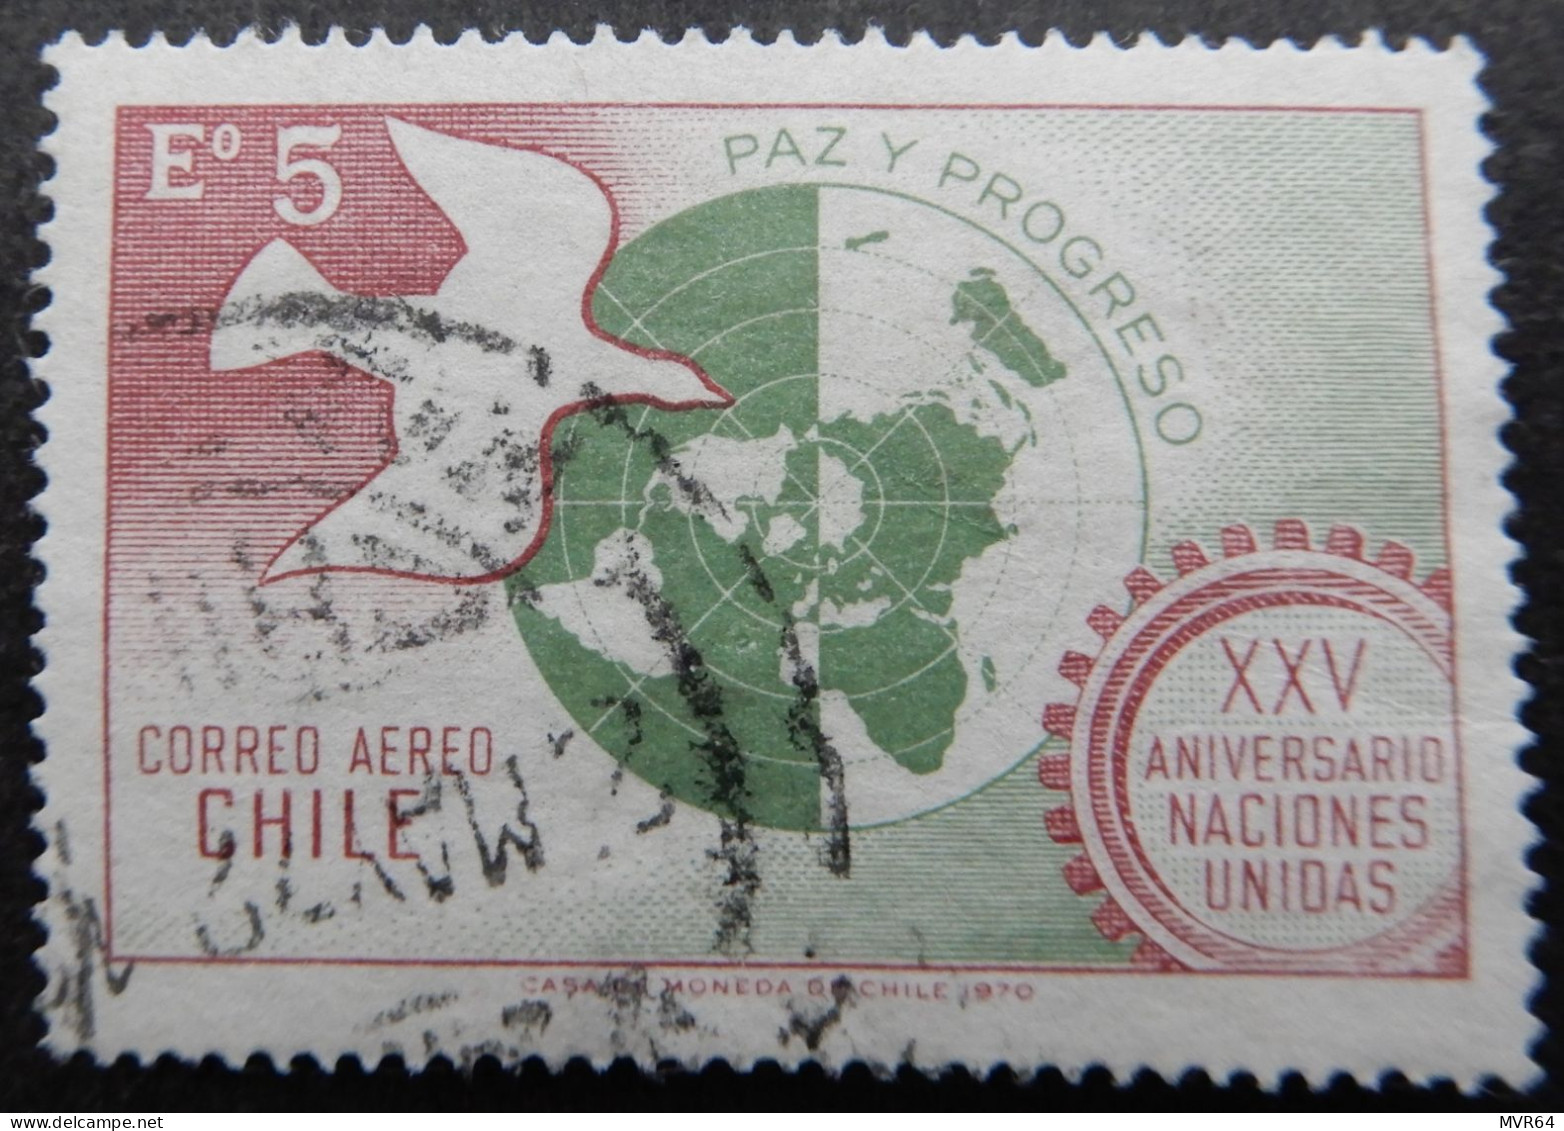 Chili Chile 1970 (2) Airmail The 25tn An. Of United Nations - Chile